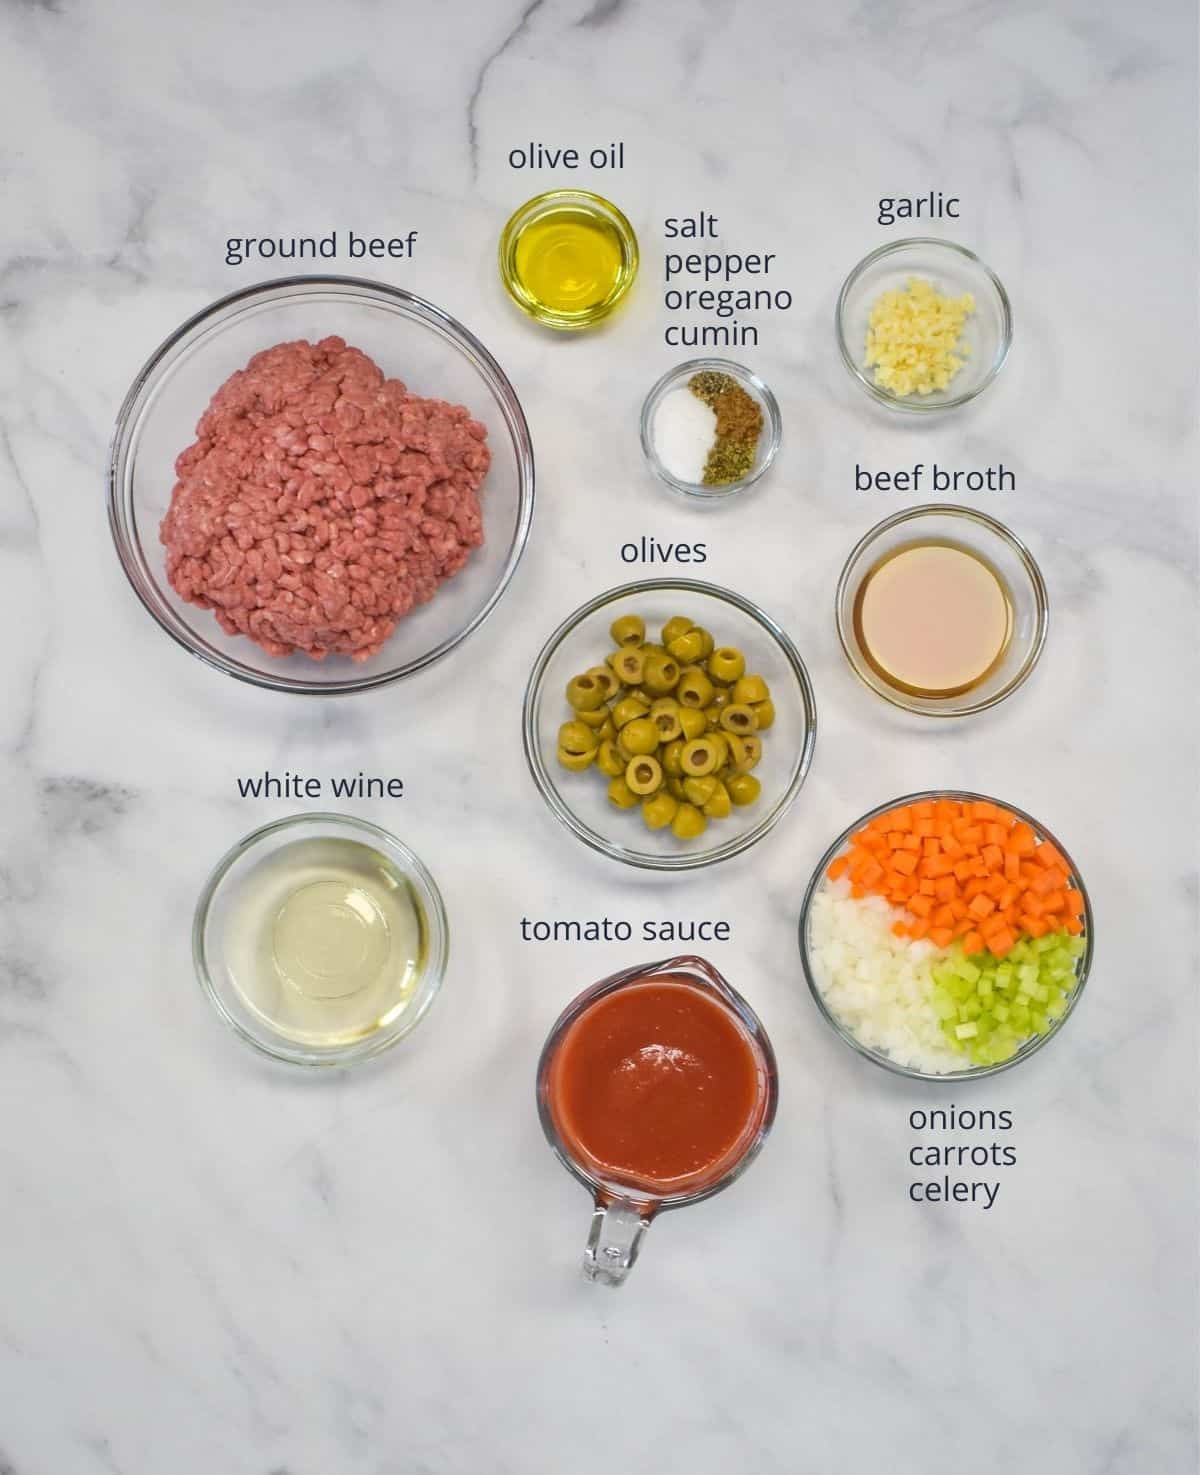 The ingredients arranged in separate bowls on a white table. Each ingredient is labeled with small black letters.